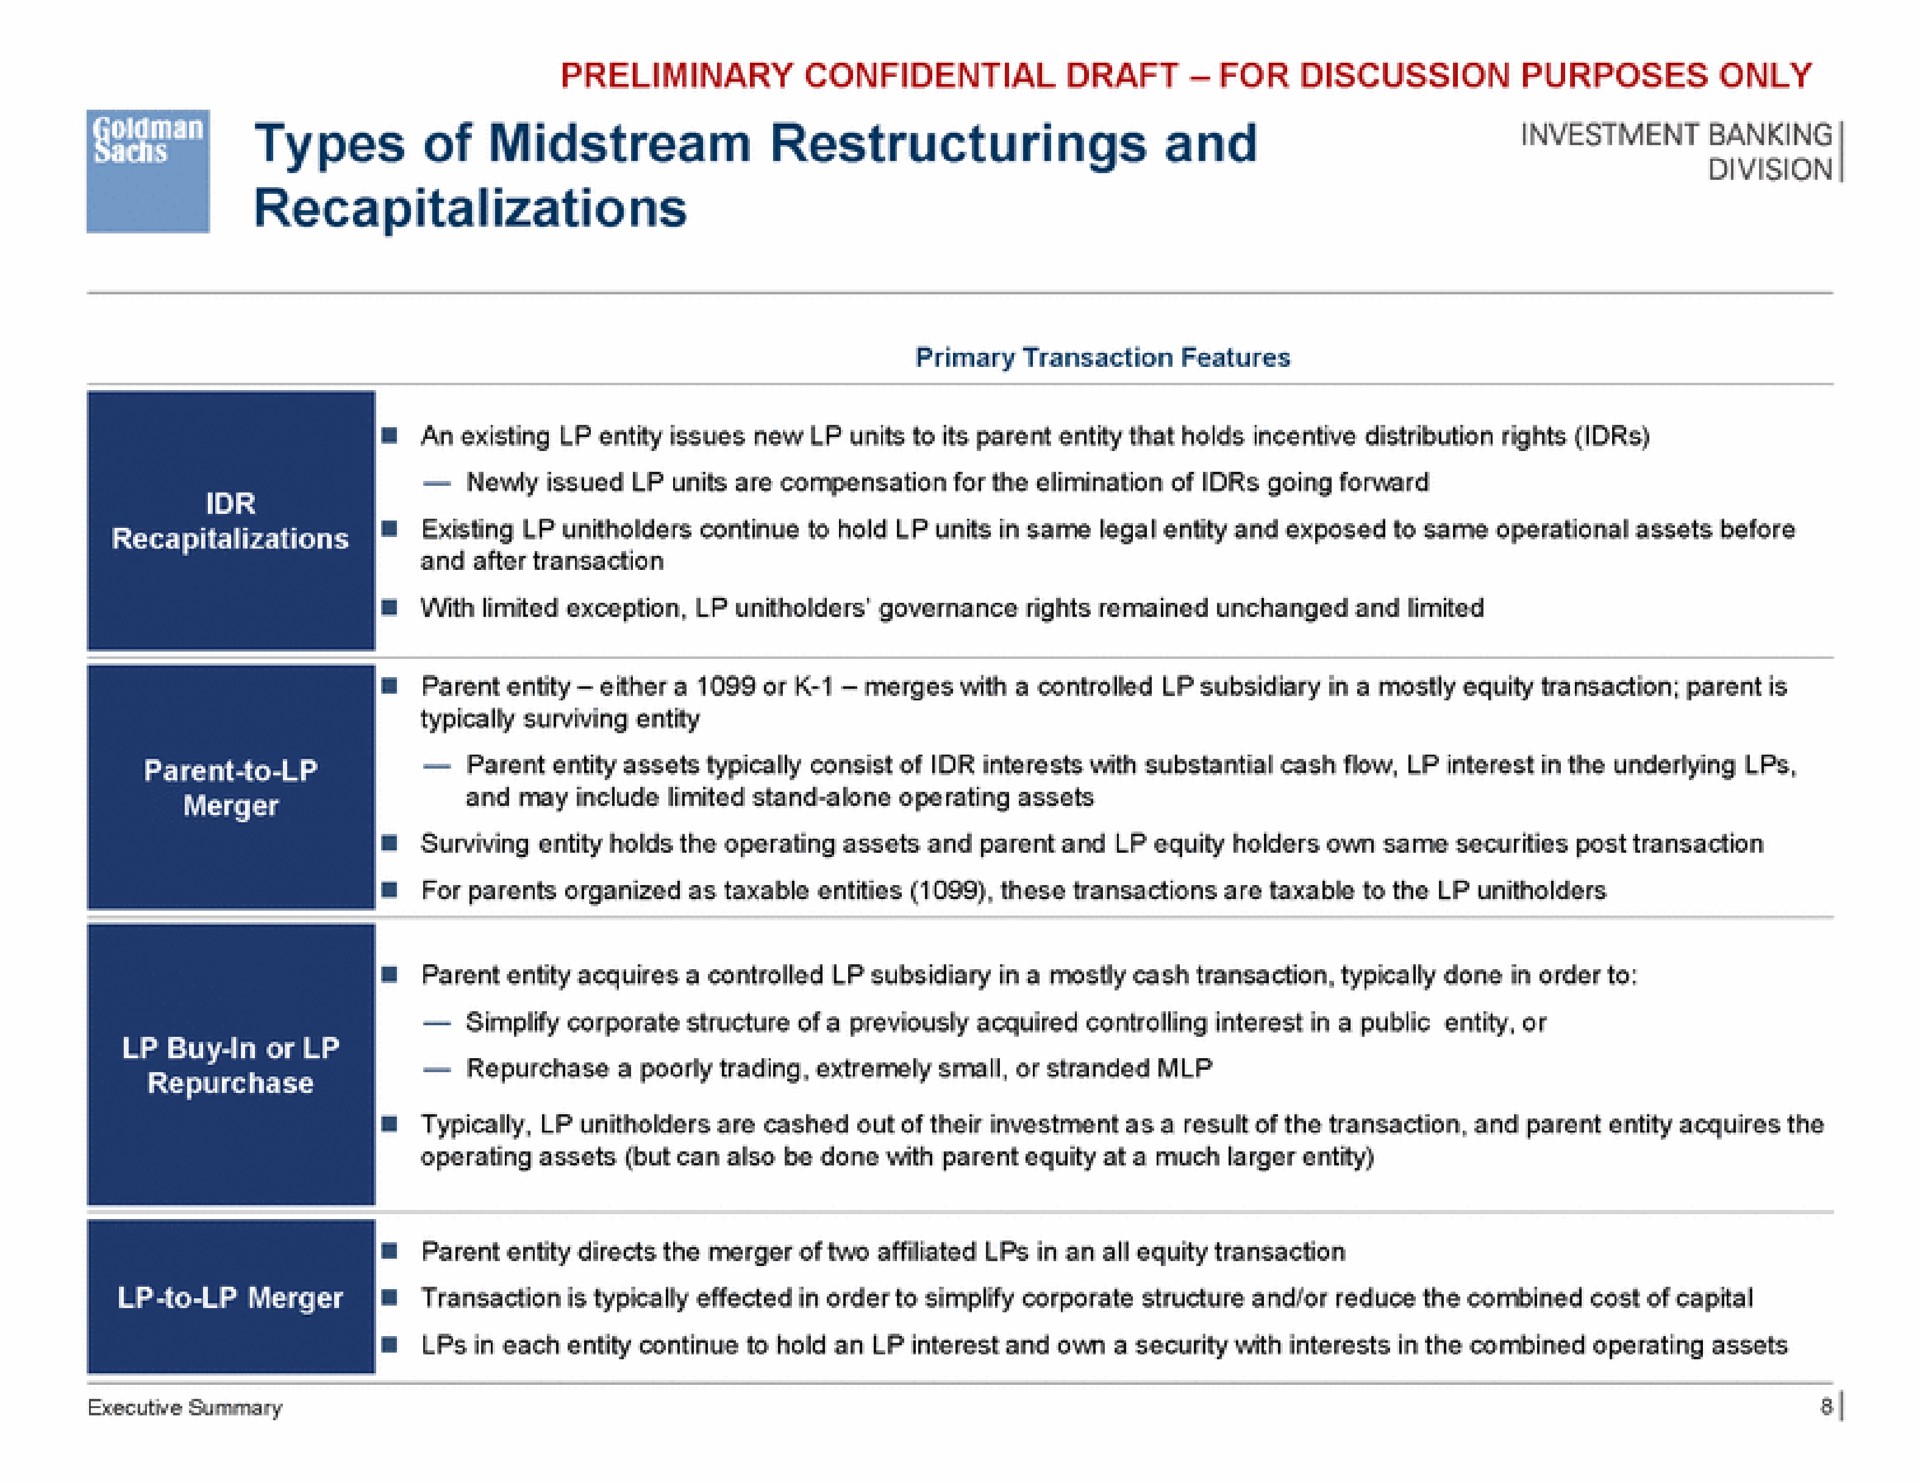 types of midstream and investment banking | Goldman Sachs